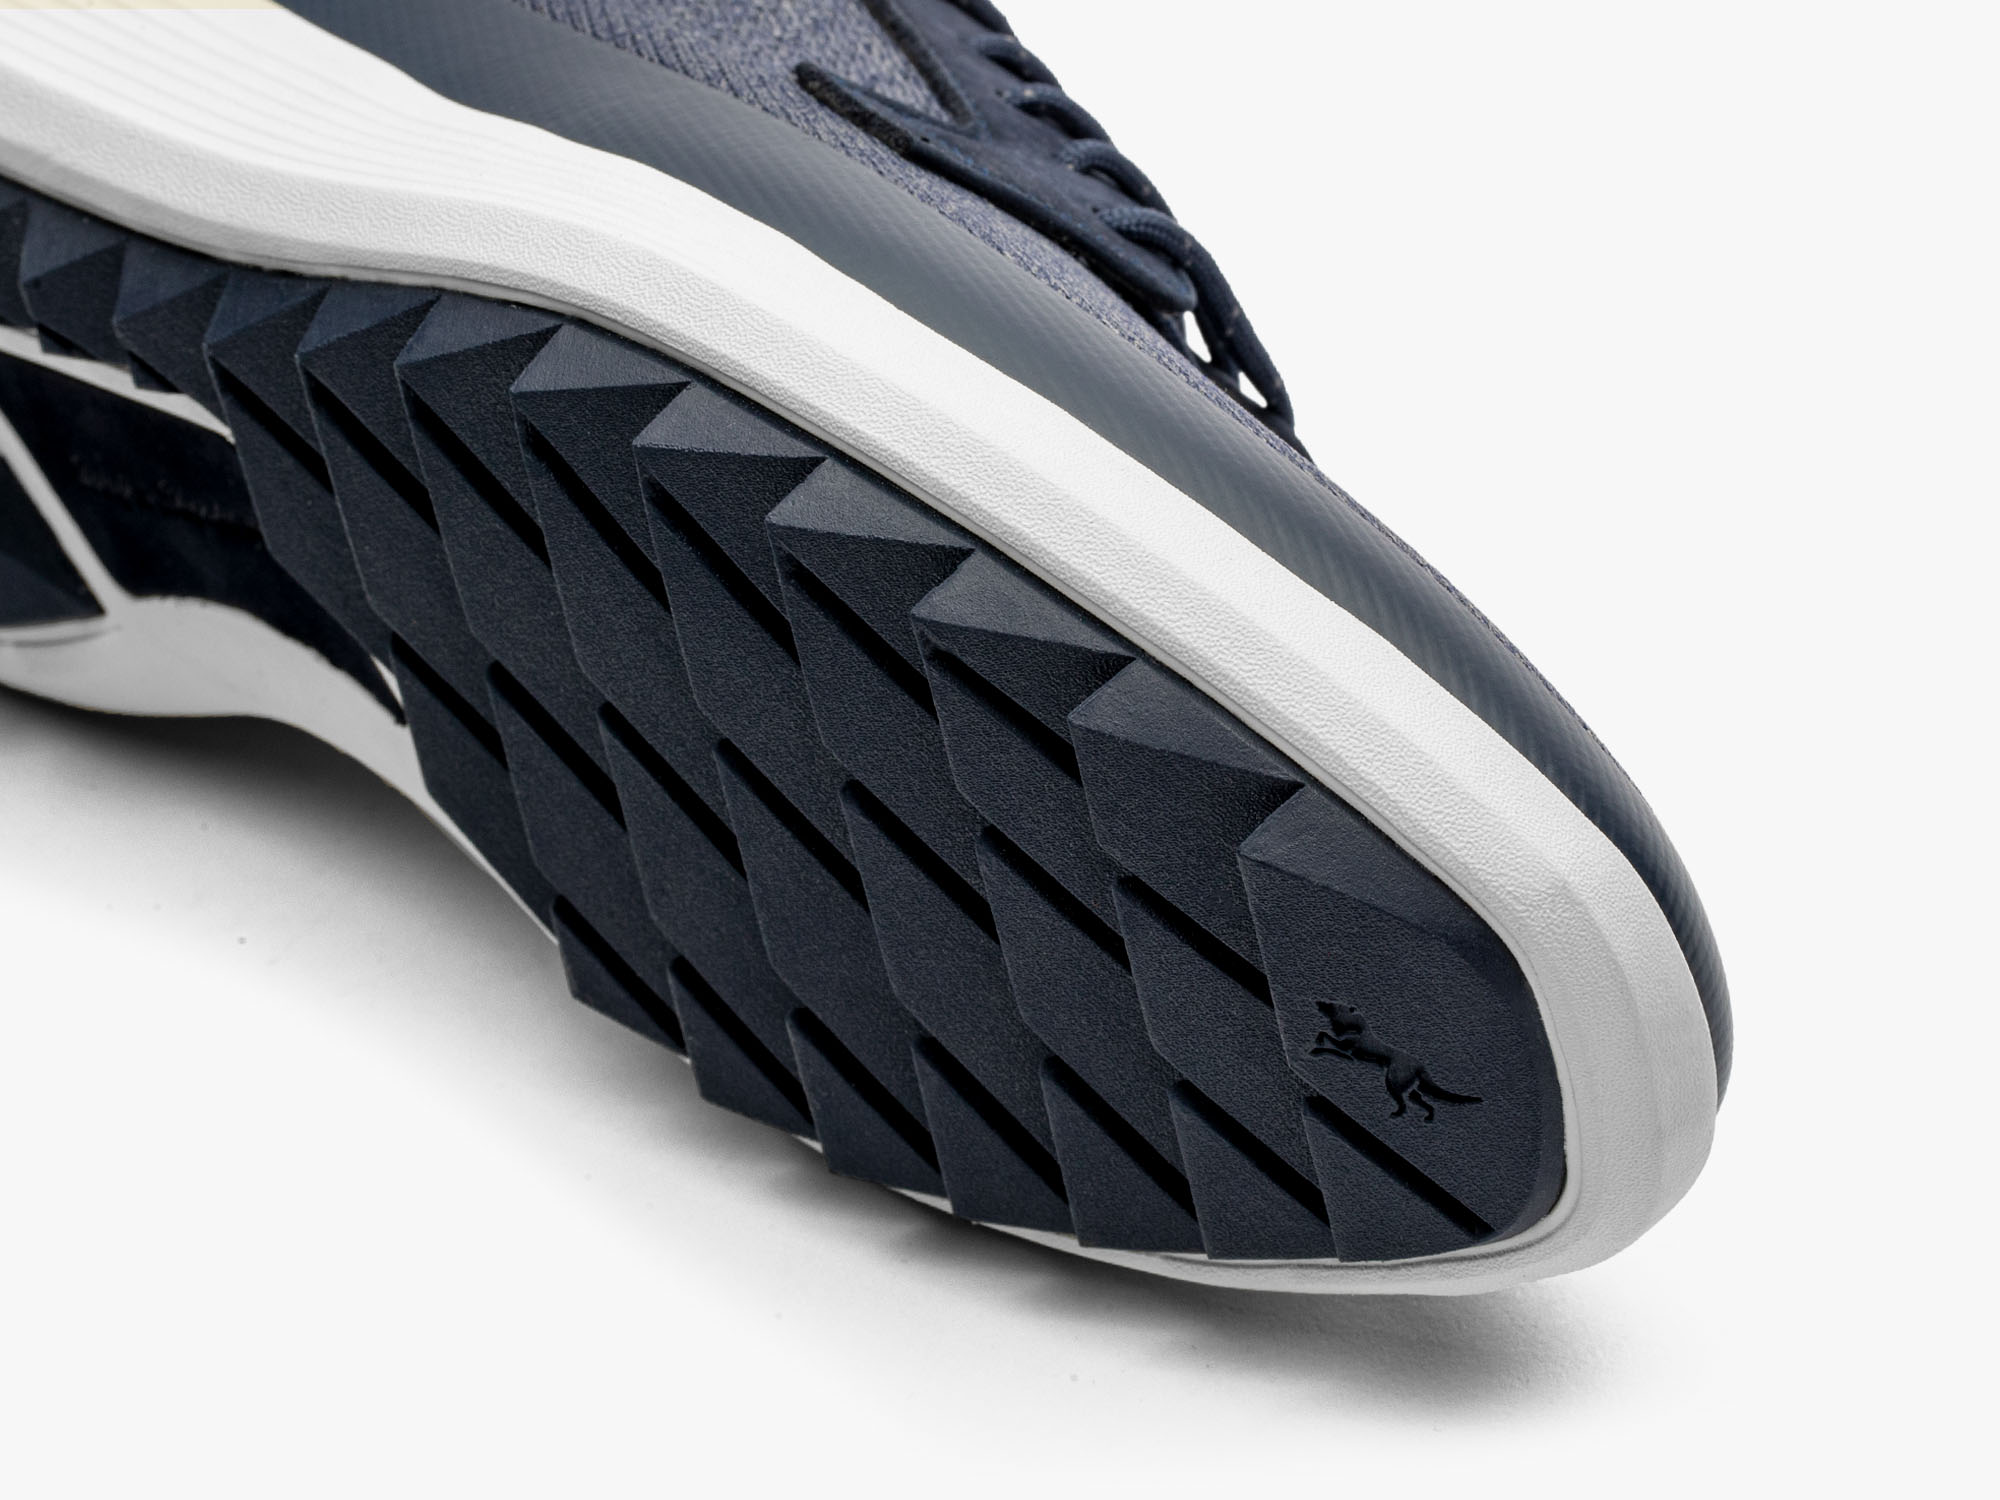 Close up image of toothgrip sole of Men's Hybrid Dress shoe Swiftknit Derby WTZ in Heather Navy on a white background